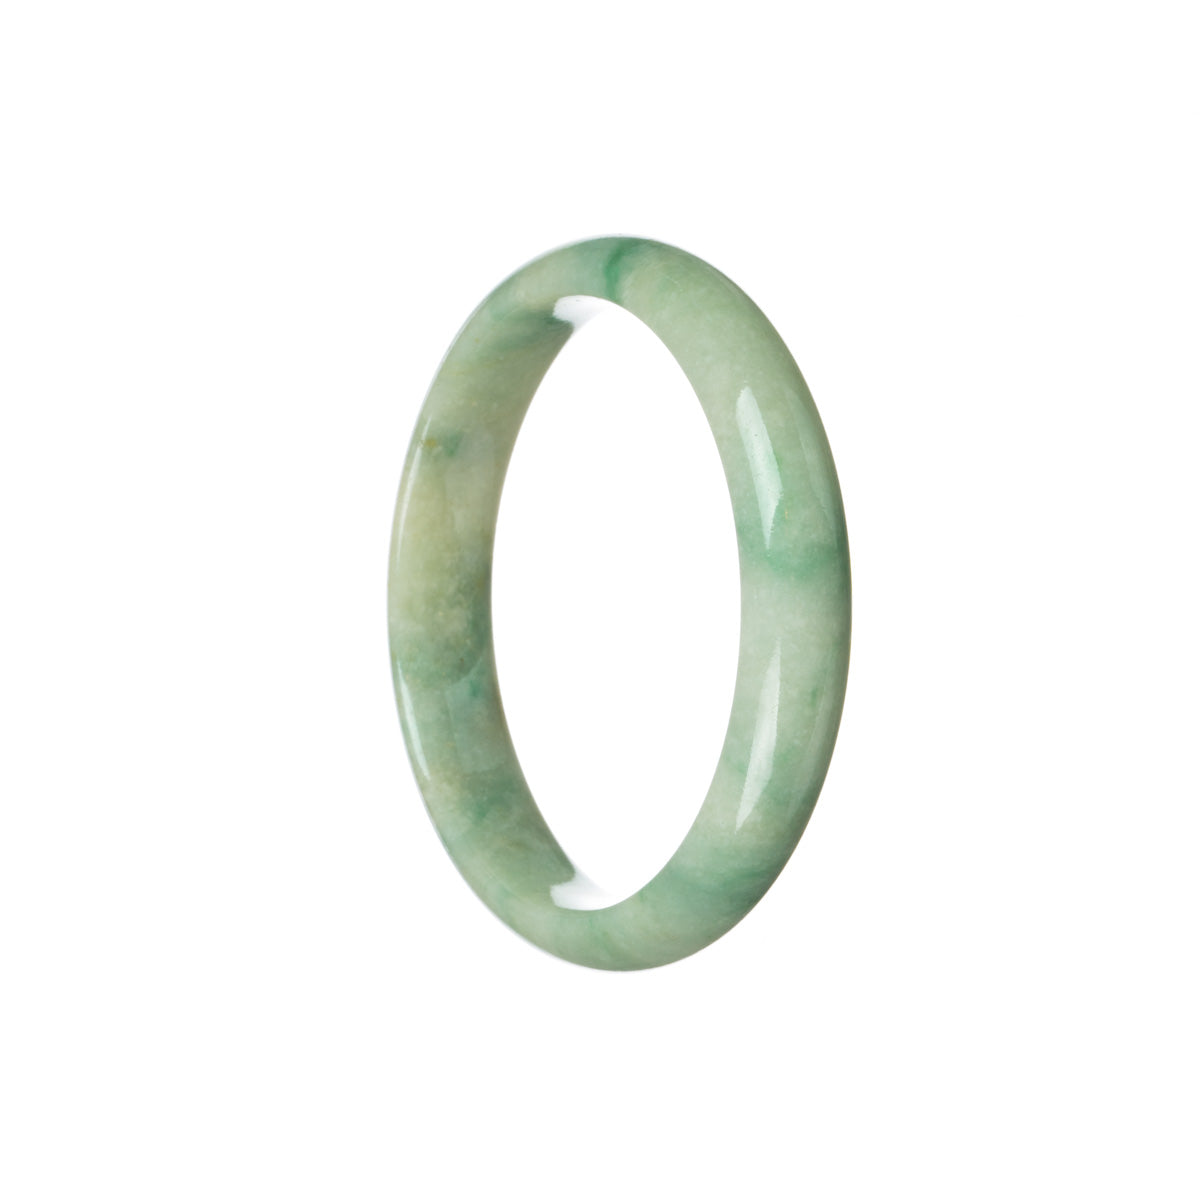 A close-up image of a green and light green flower-shaped jade bangle bracelet. The bracelet is made from genuine Type A green jadeite jade and has a half-moon shape with a diameter of 57mm. This bracelet is part of the MAYS™ collection.